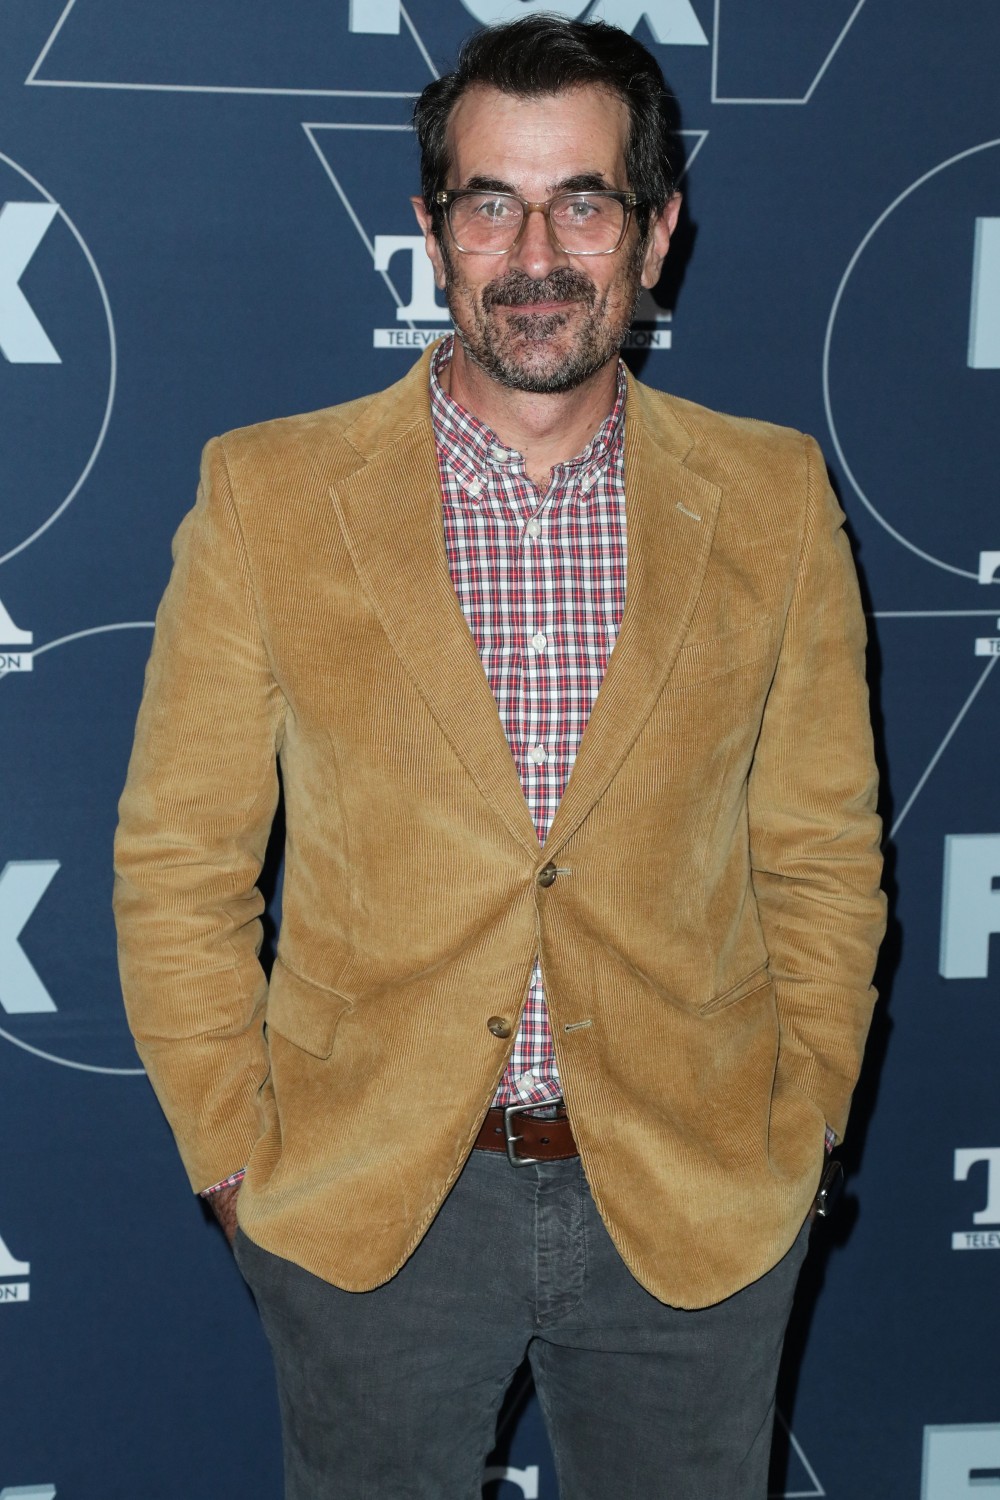 Ty Burrell arrives at the FOX Winter TCA 2020 All-Star Party held at The Langham Huntington Hotel on January 7, 2020 in Pasadena, Los Angeles, California, United States.